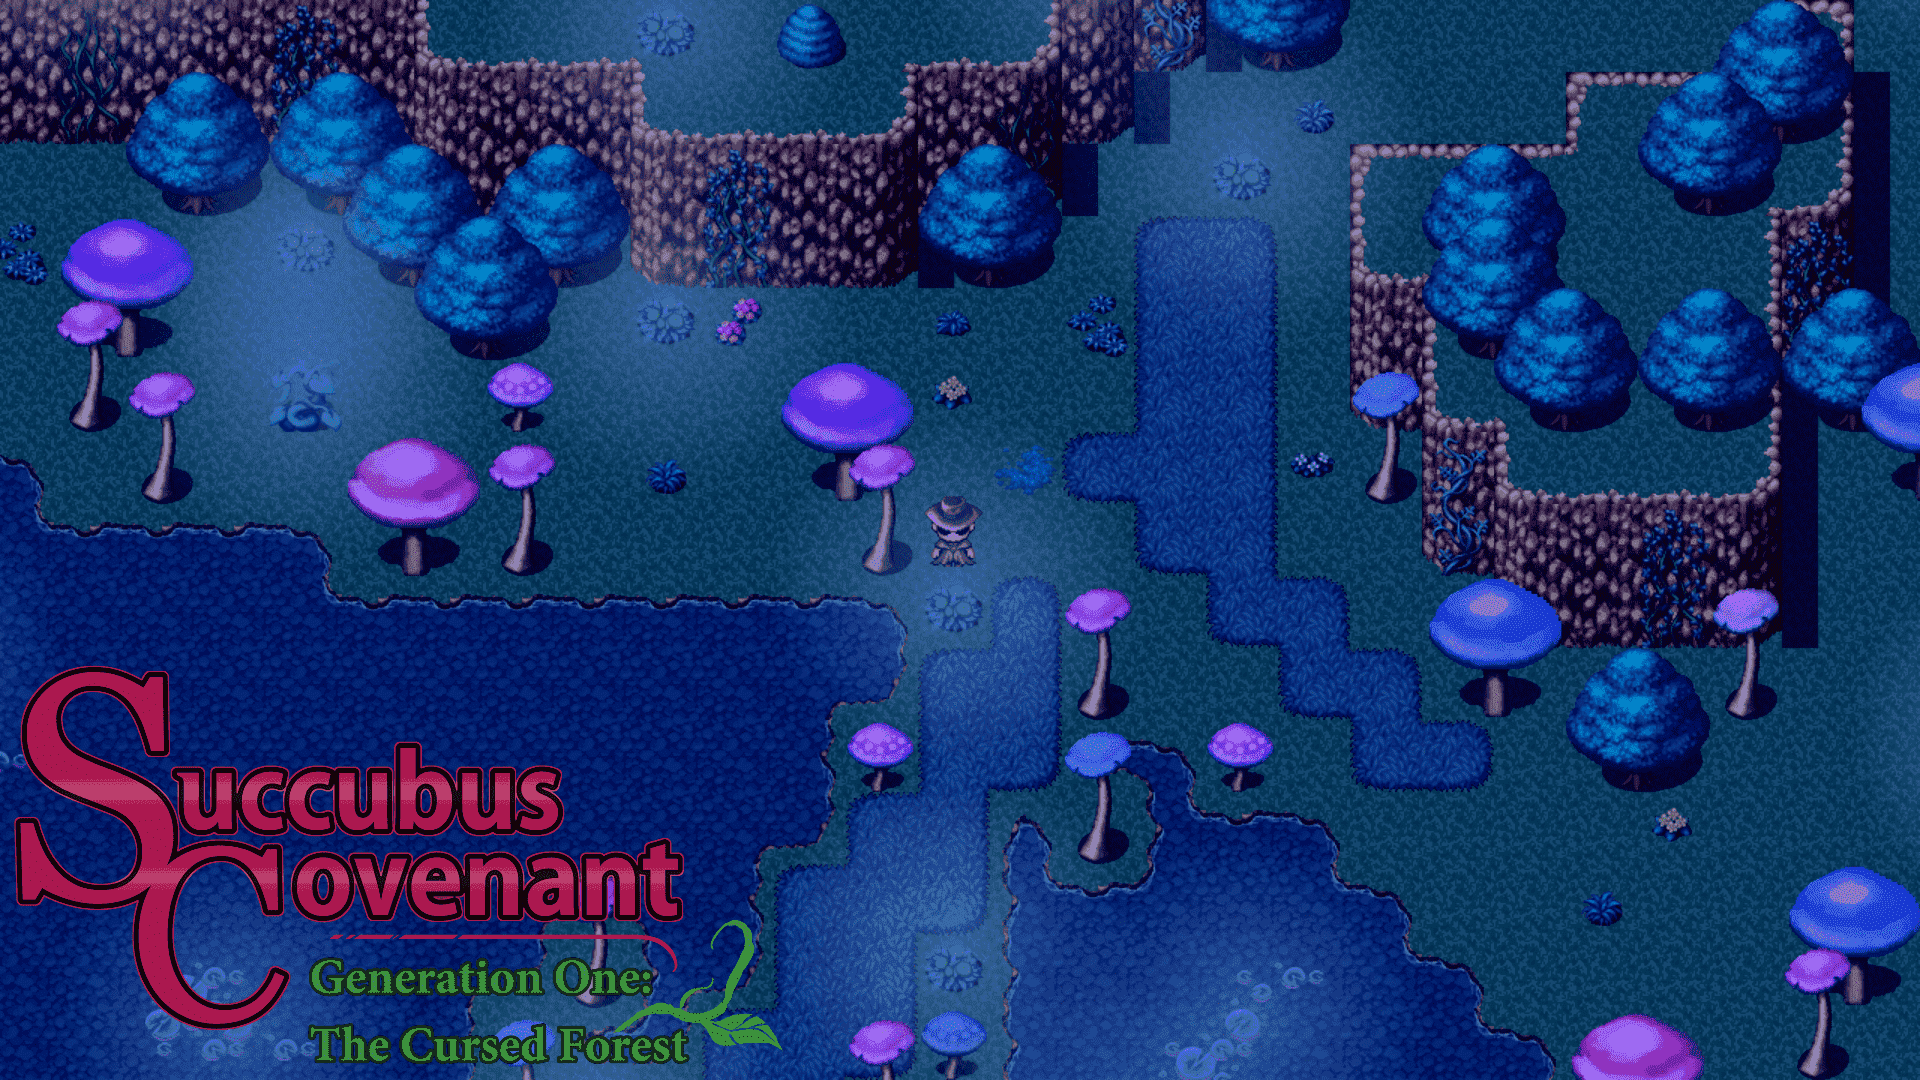 Succubus Covenant Generation One: The Cursed Forest Screenshot1